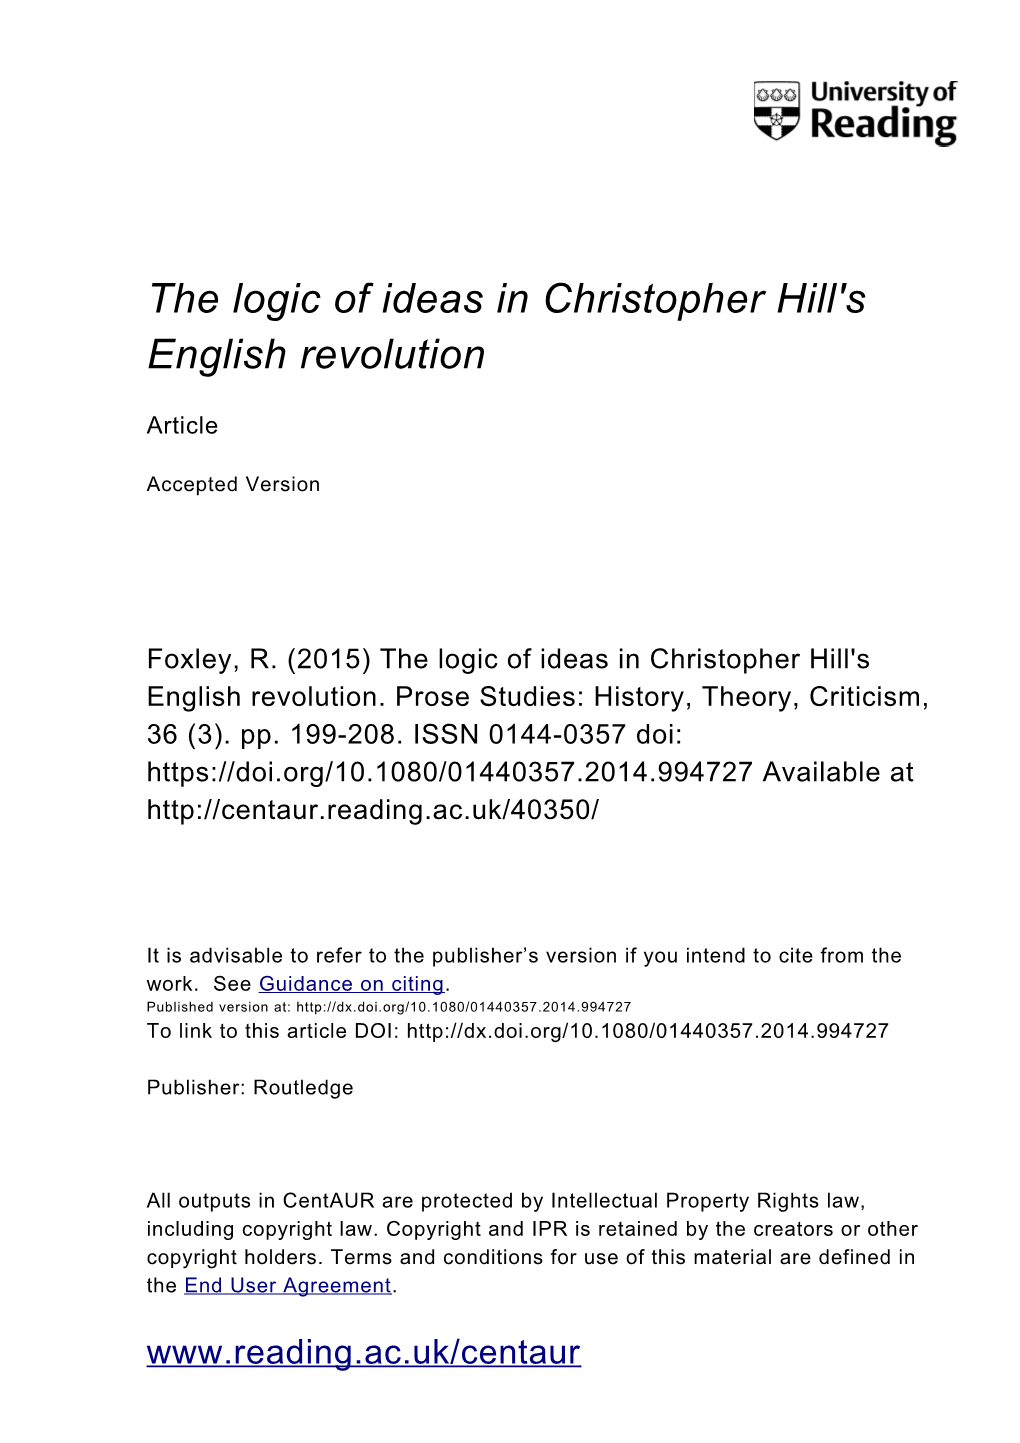 The Logic of Ideas in Christopher Hill's English Revolution